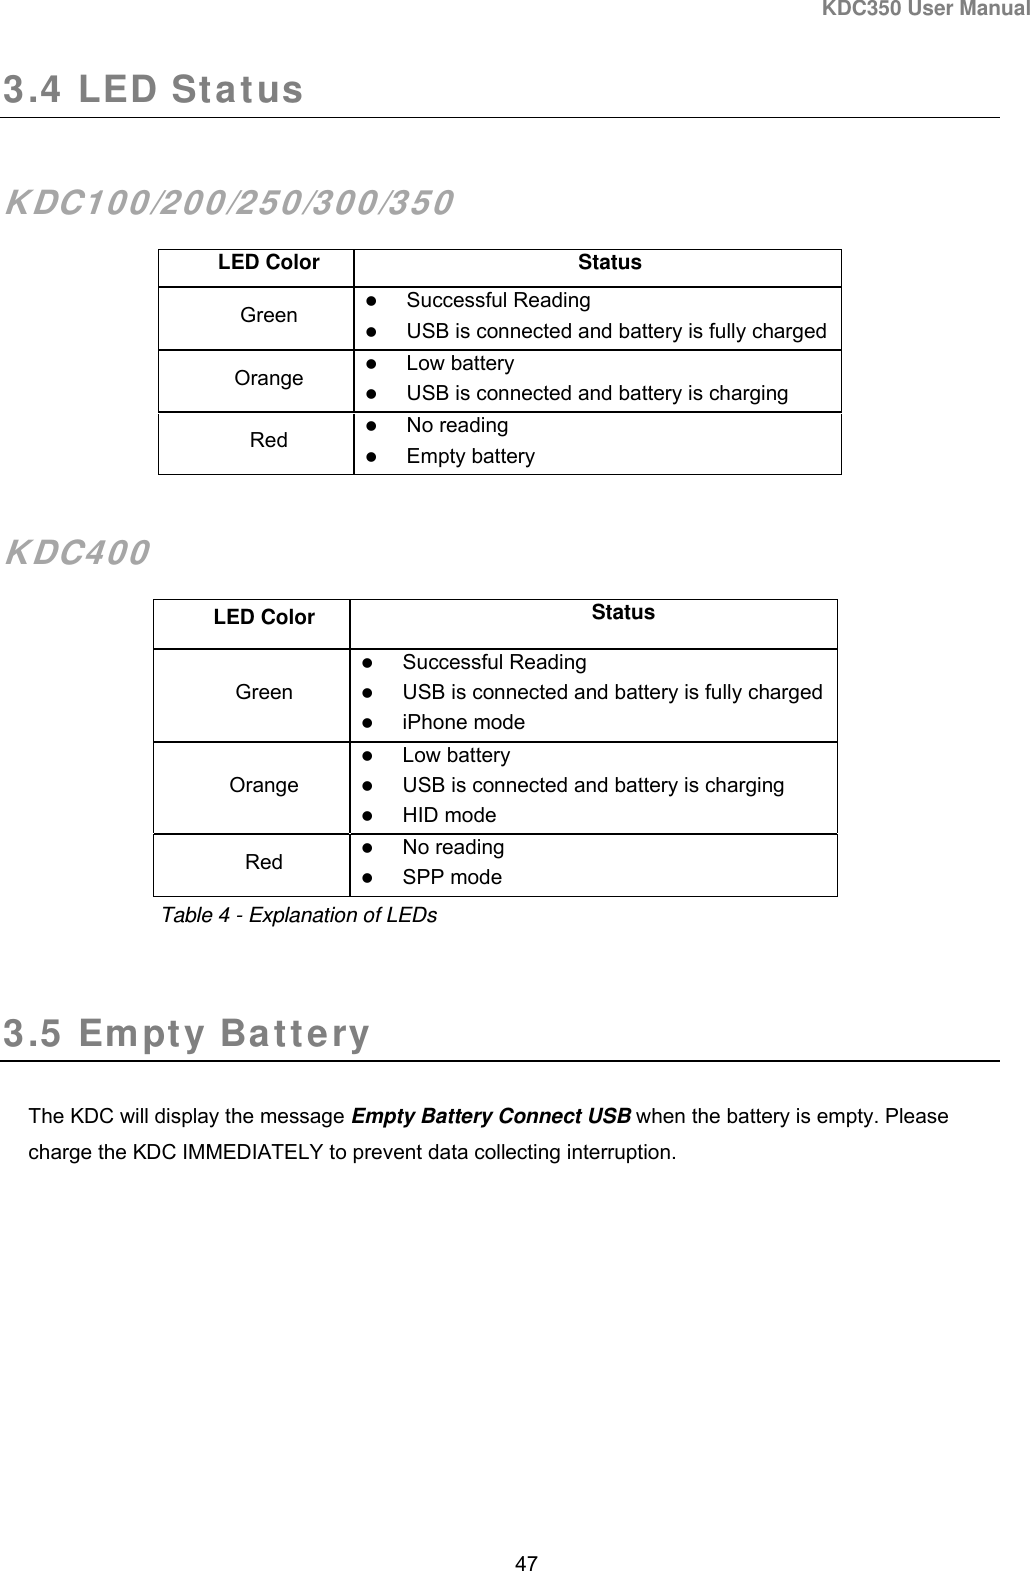 KDC350 User Manual  47  3.4 LED Status   KDC100/200/250/300/350 LED Color  Status Green   Successful Reading  USB is connected and battery is fully charged Orange   Low battery  USB is connected and battery is charging Red   No reading  Empty battery  KDC400 LED Color  Status Green  Successful Reading  USB is connected and battery is fully charged  iPhone mode Orange  Low battery  USB is connected and battery is charging  HID mode Red   No reading  SPP mode Table 4 - Explanation of LEDs  3.5 Empty Battery   The KDC will display the message Empty Battery Connect USB when the battery is empty. Please charge the KDC IMMEDIATELY to prevent data collecting interruption. 